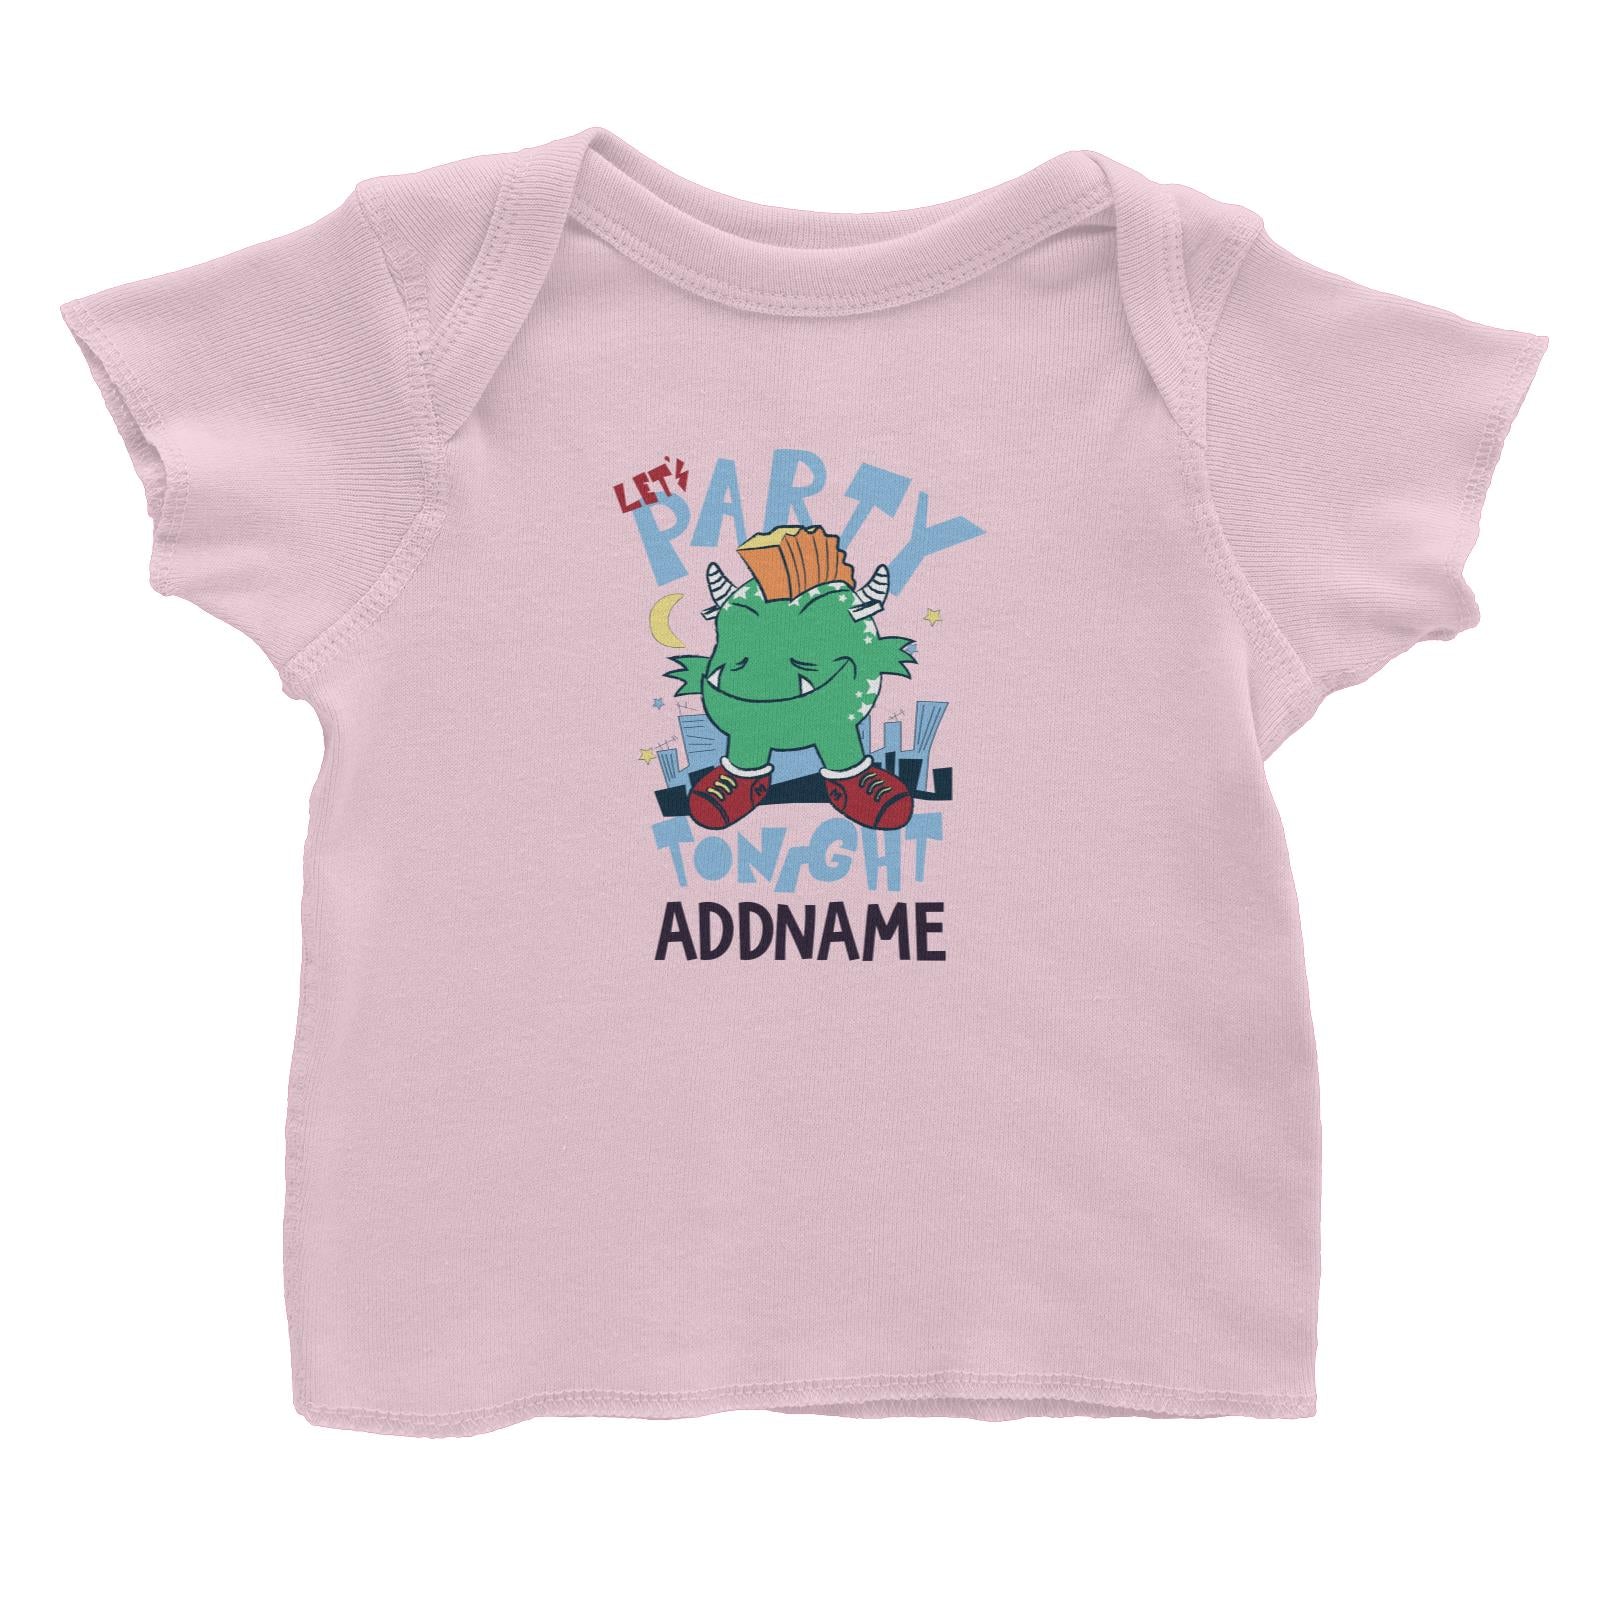 Cool Vibrant Series Let's Party Tonight MonsterAddname Baby T-Shirt